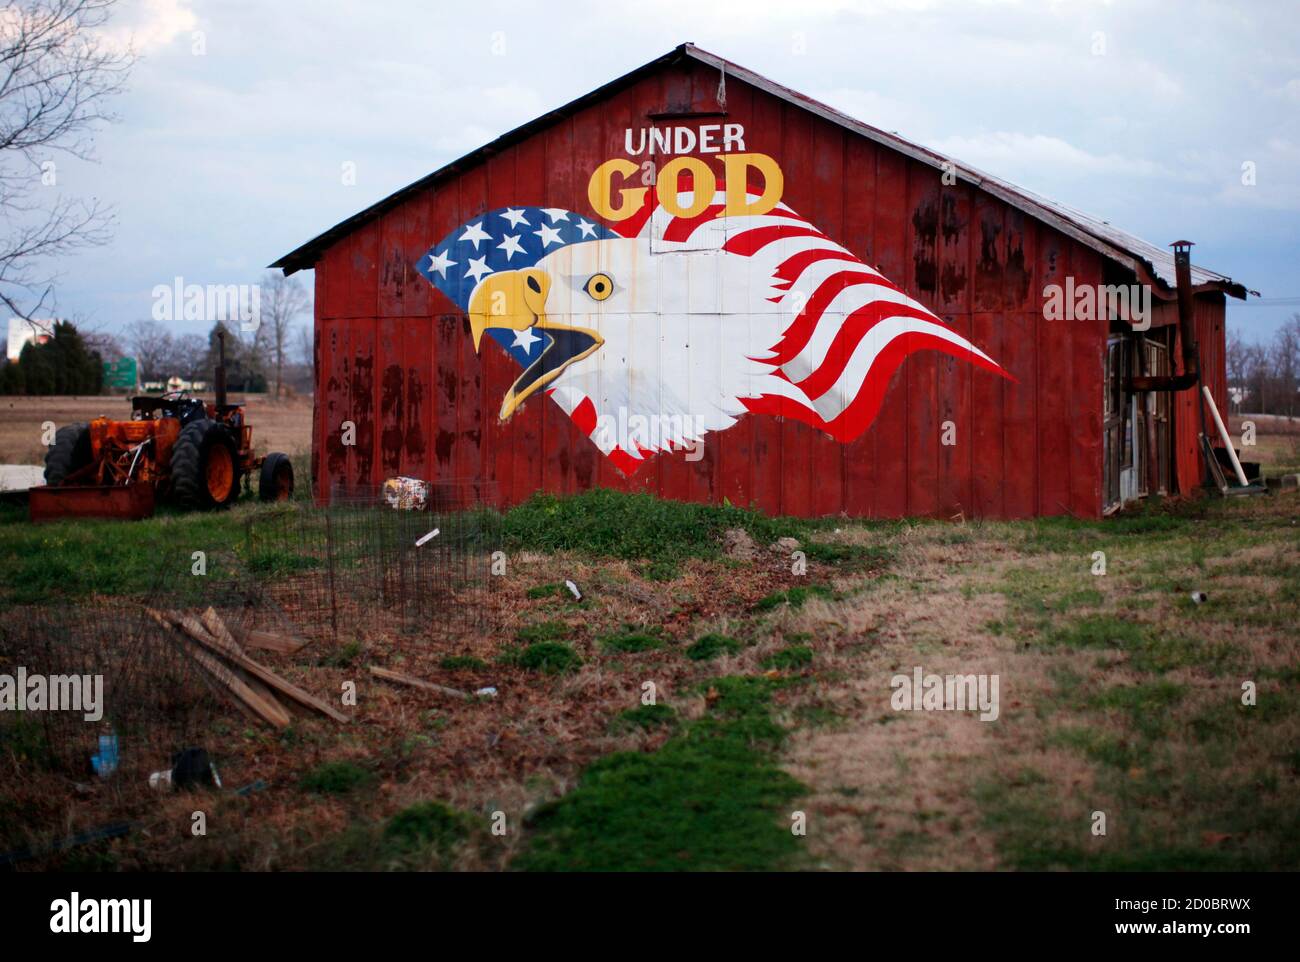 THE GREAT AMERICAN HEARTLAND Country Farm Red Barn 12.5" x 18" Small Banner Flag 